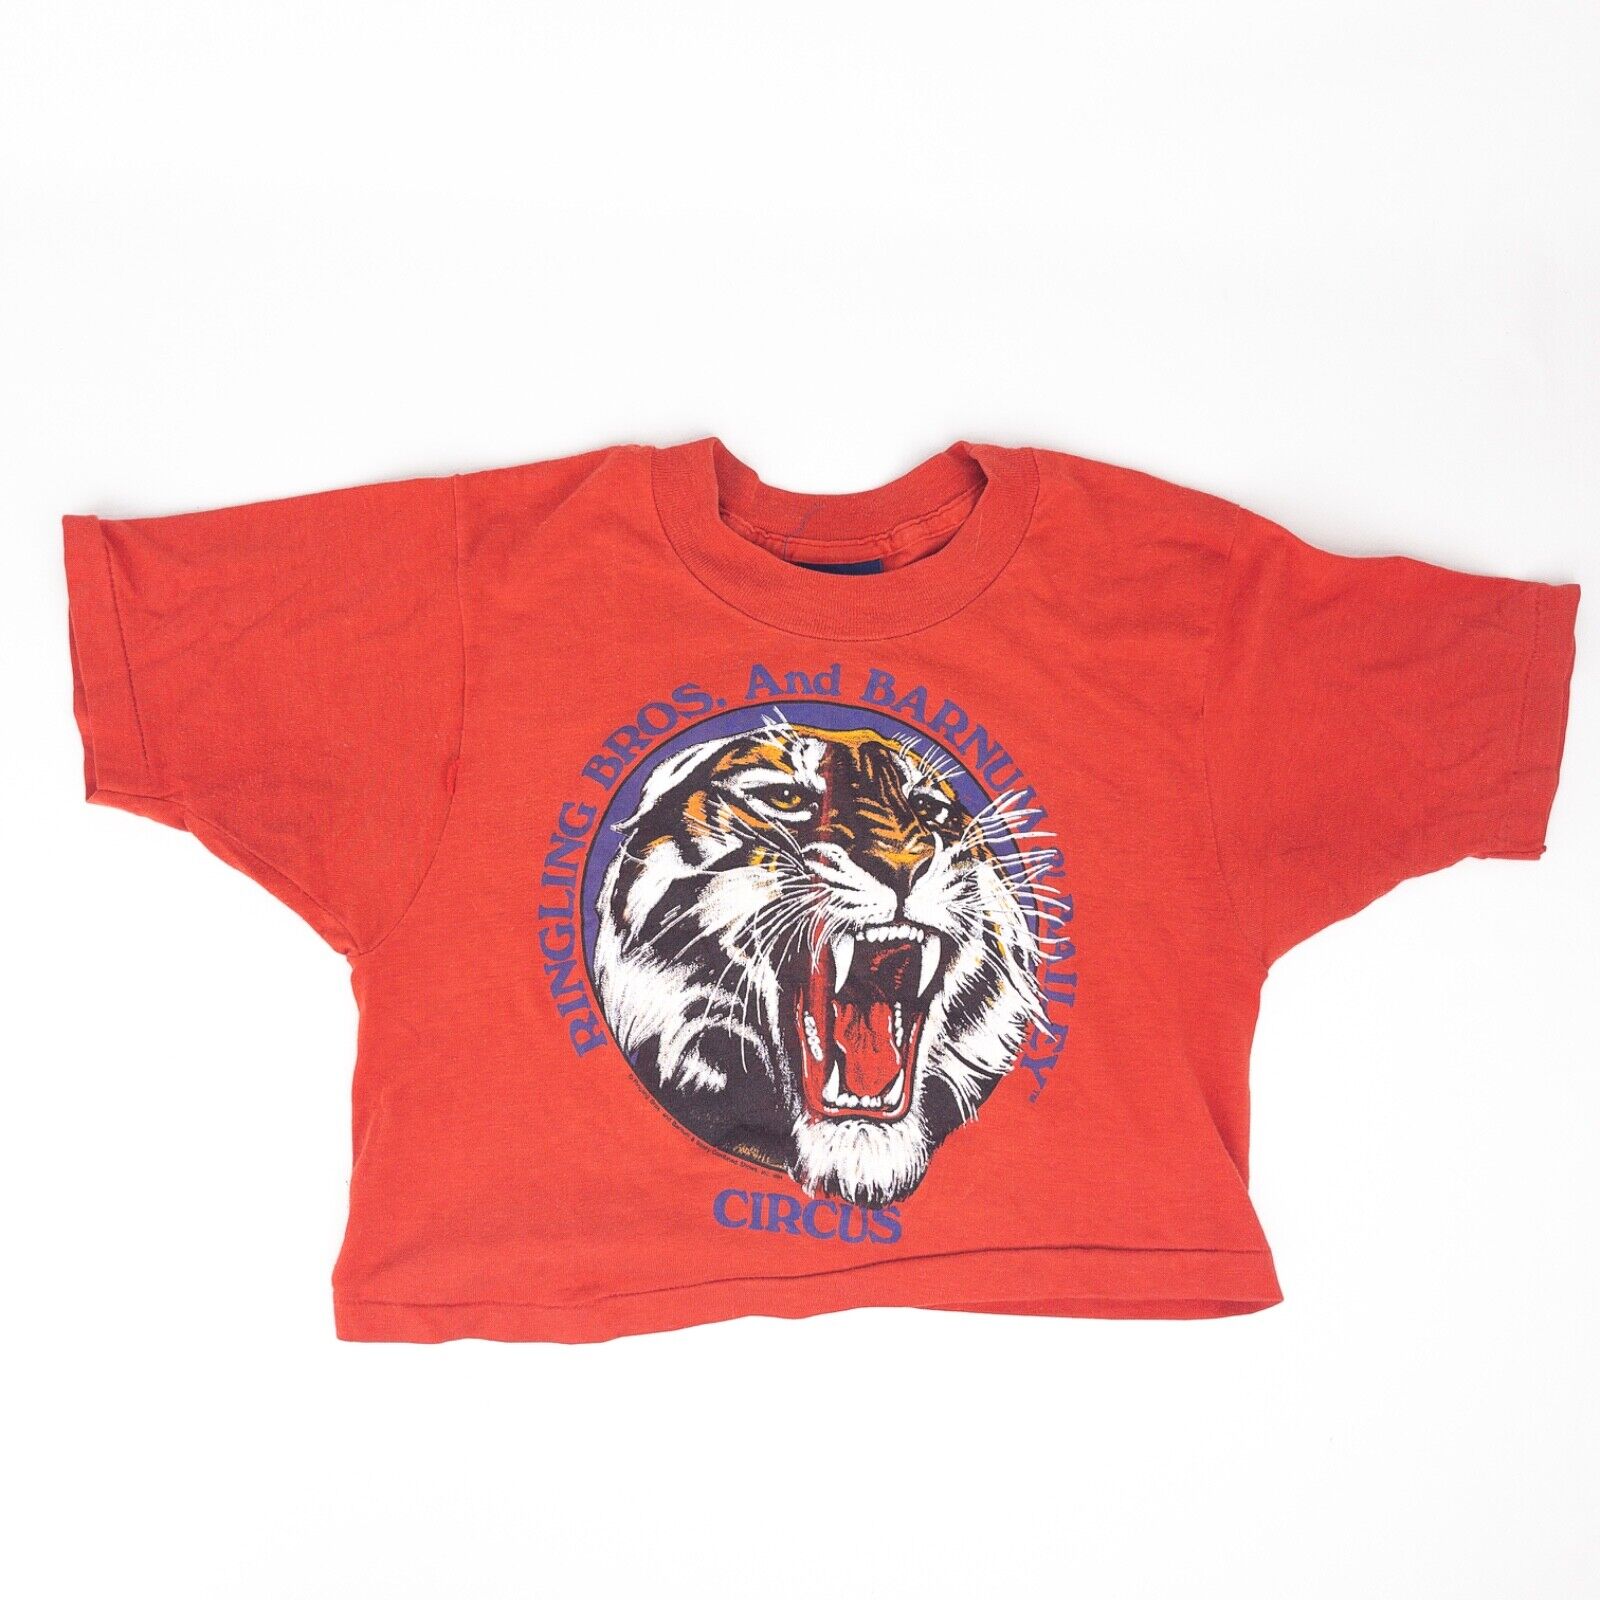 Vtg RINGLING BROTHERS AND BARNUM BAILEY CIRCUS Tiger CROP Top T Shirt Sz S